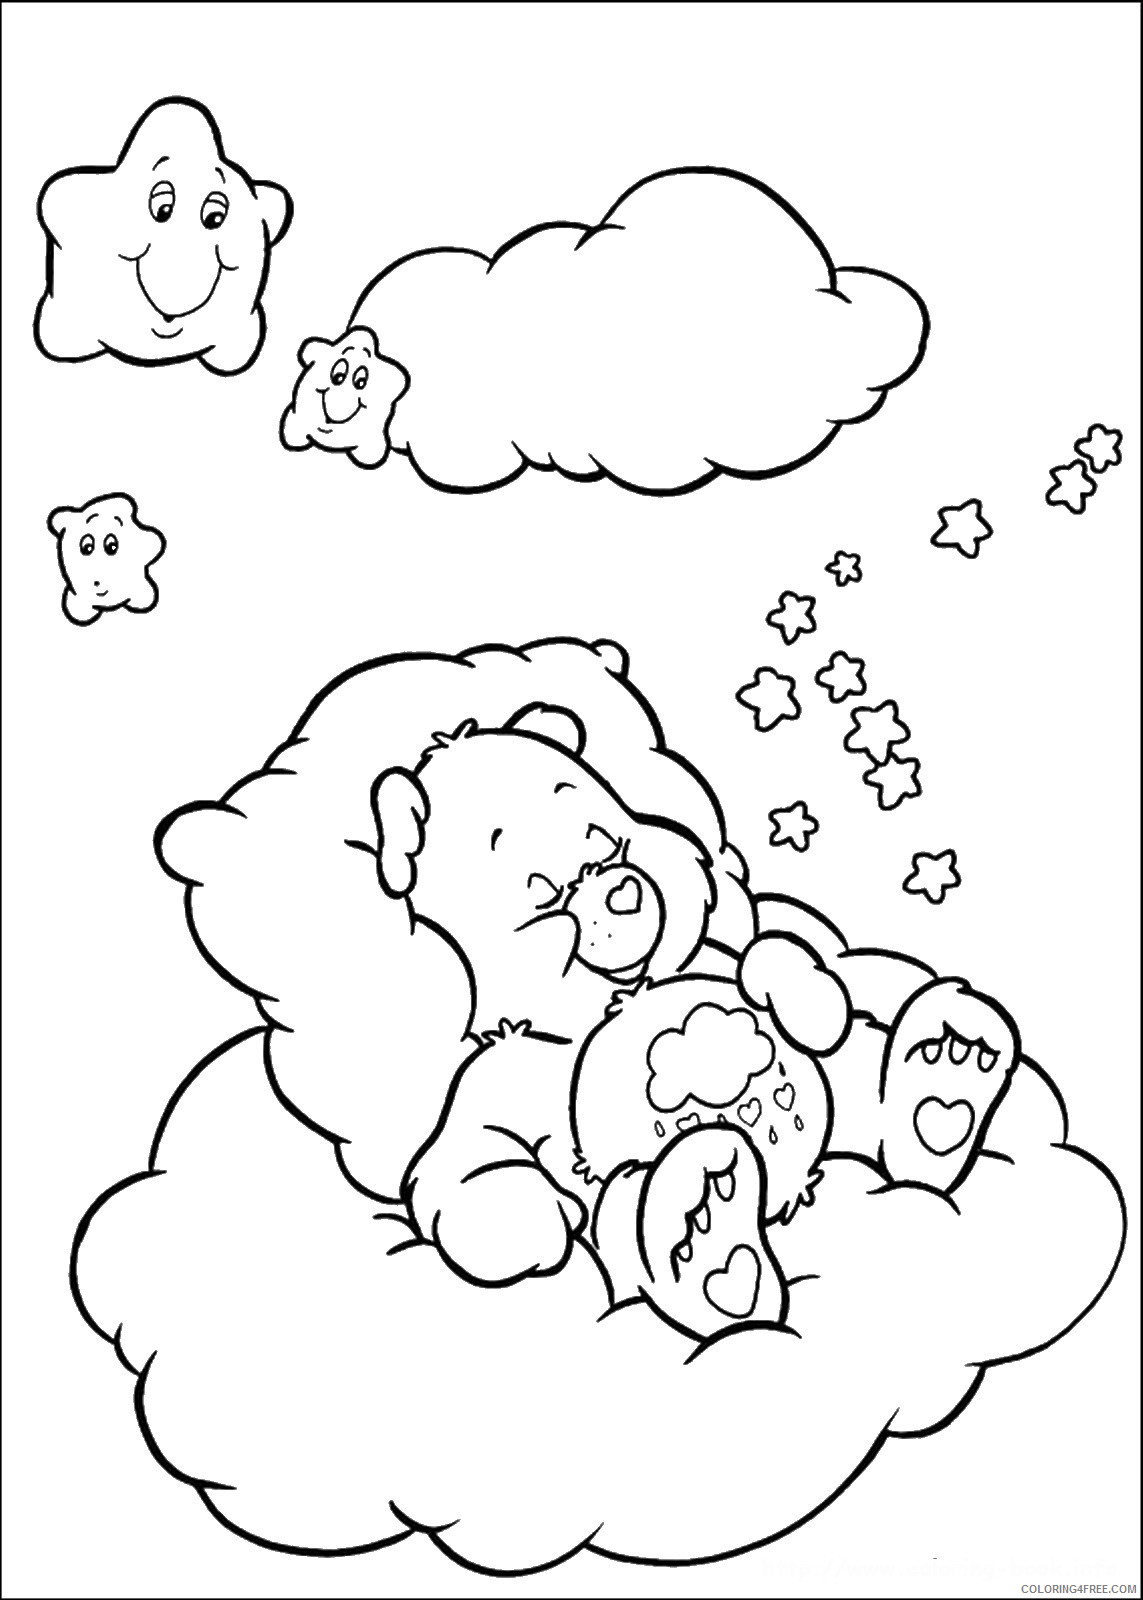 Care Bears Coloring Pages Cartoons care_bears_cl_24 Printable 2020 1560 Coloring4free